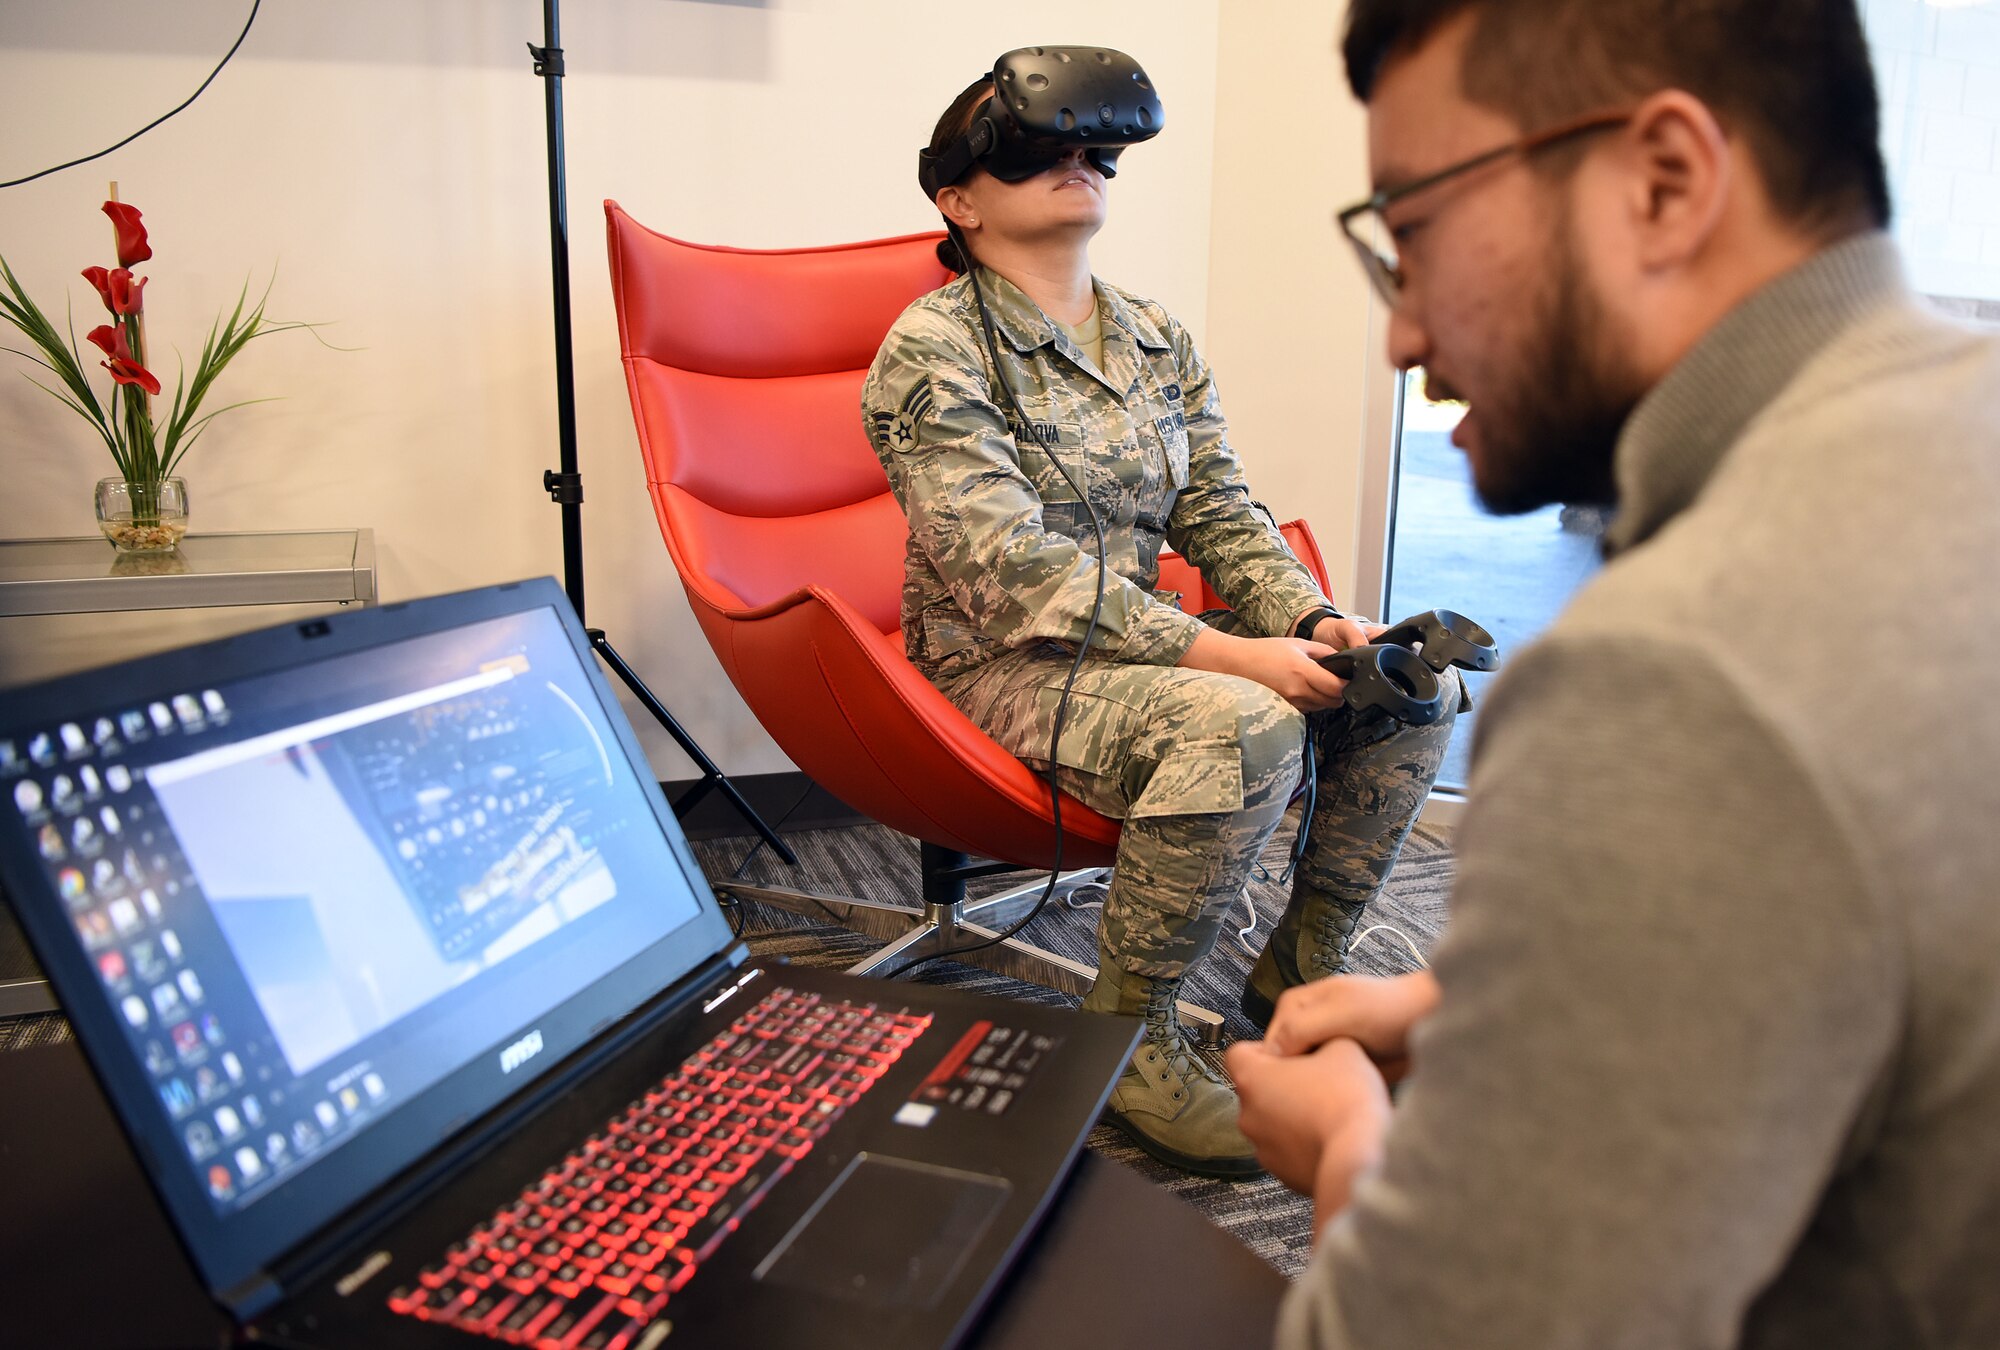 Senior Airman Alzara Kimalova, Air Force Sustainment Center contract specialist, walks through power-off procedures for C-130H Hercules through virtual reality technology at the Inaugural Pitch Day hosted by the Robins Spark Cell and AFSC Contracting located at Robins Air Force Base, Ga., Sept. 20, 2019, at the Advanced Technology and Training Center in Warner Robins, Ga. The event is an initial prototype effort to assess the capabilities of current commercially available virtual reality training systems when used in a military environment, particularly within the 461st and 116th Air Control Wings at Robins. (U.S. Air Force photo by Tommie Horton)